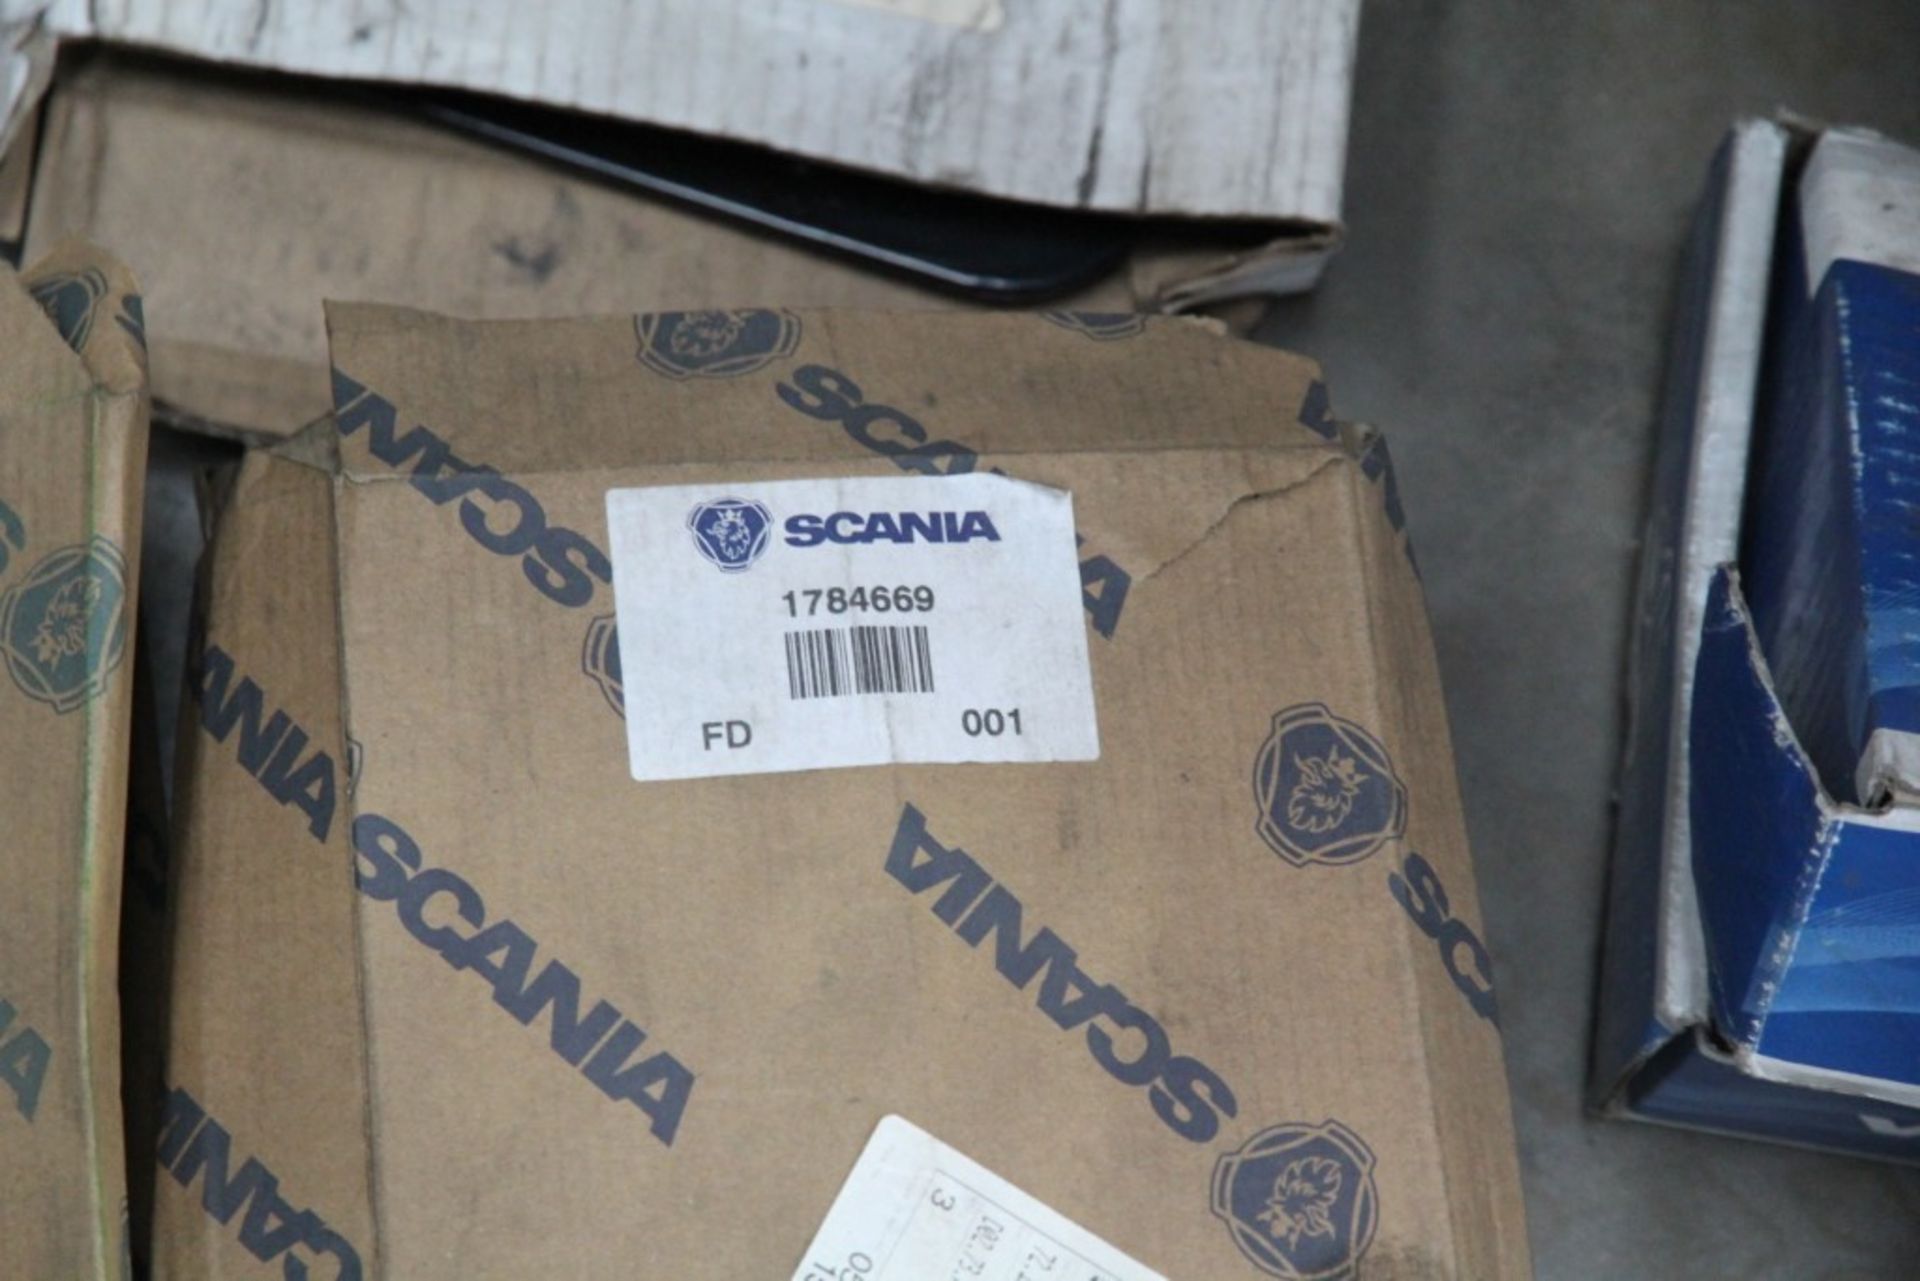 Scania Parts (1 Pallet) - Image 20 of 27